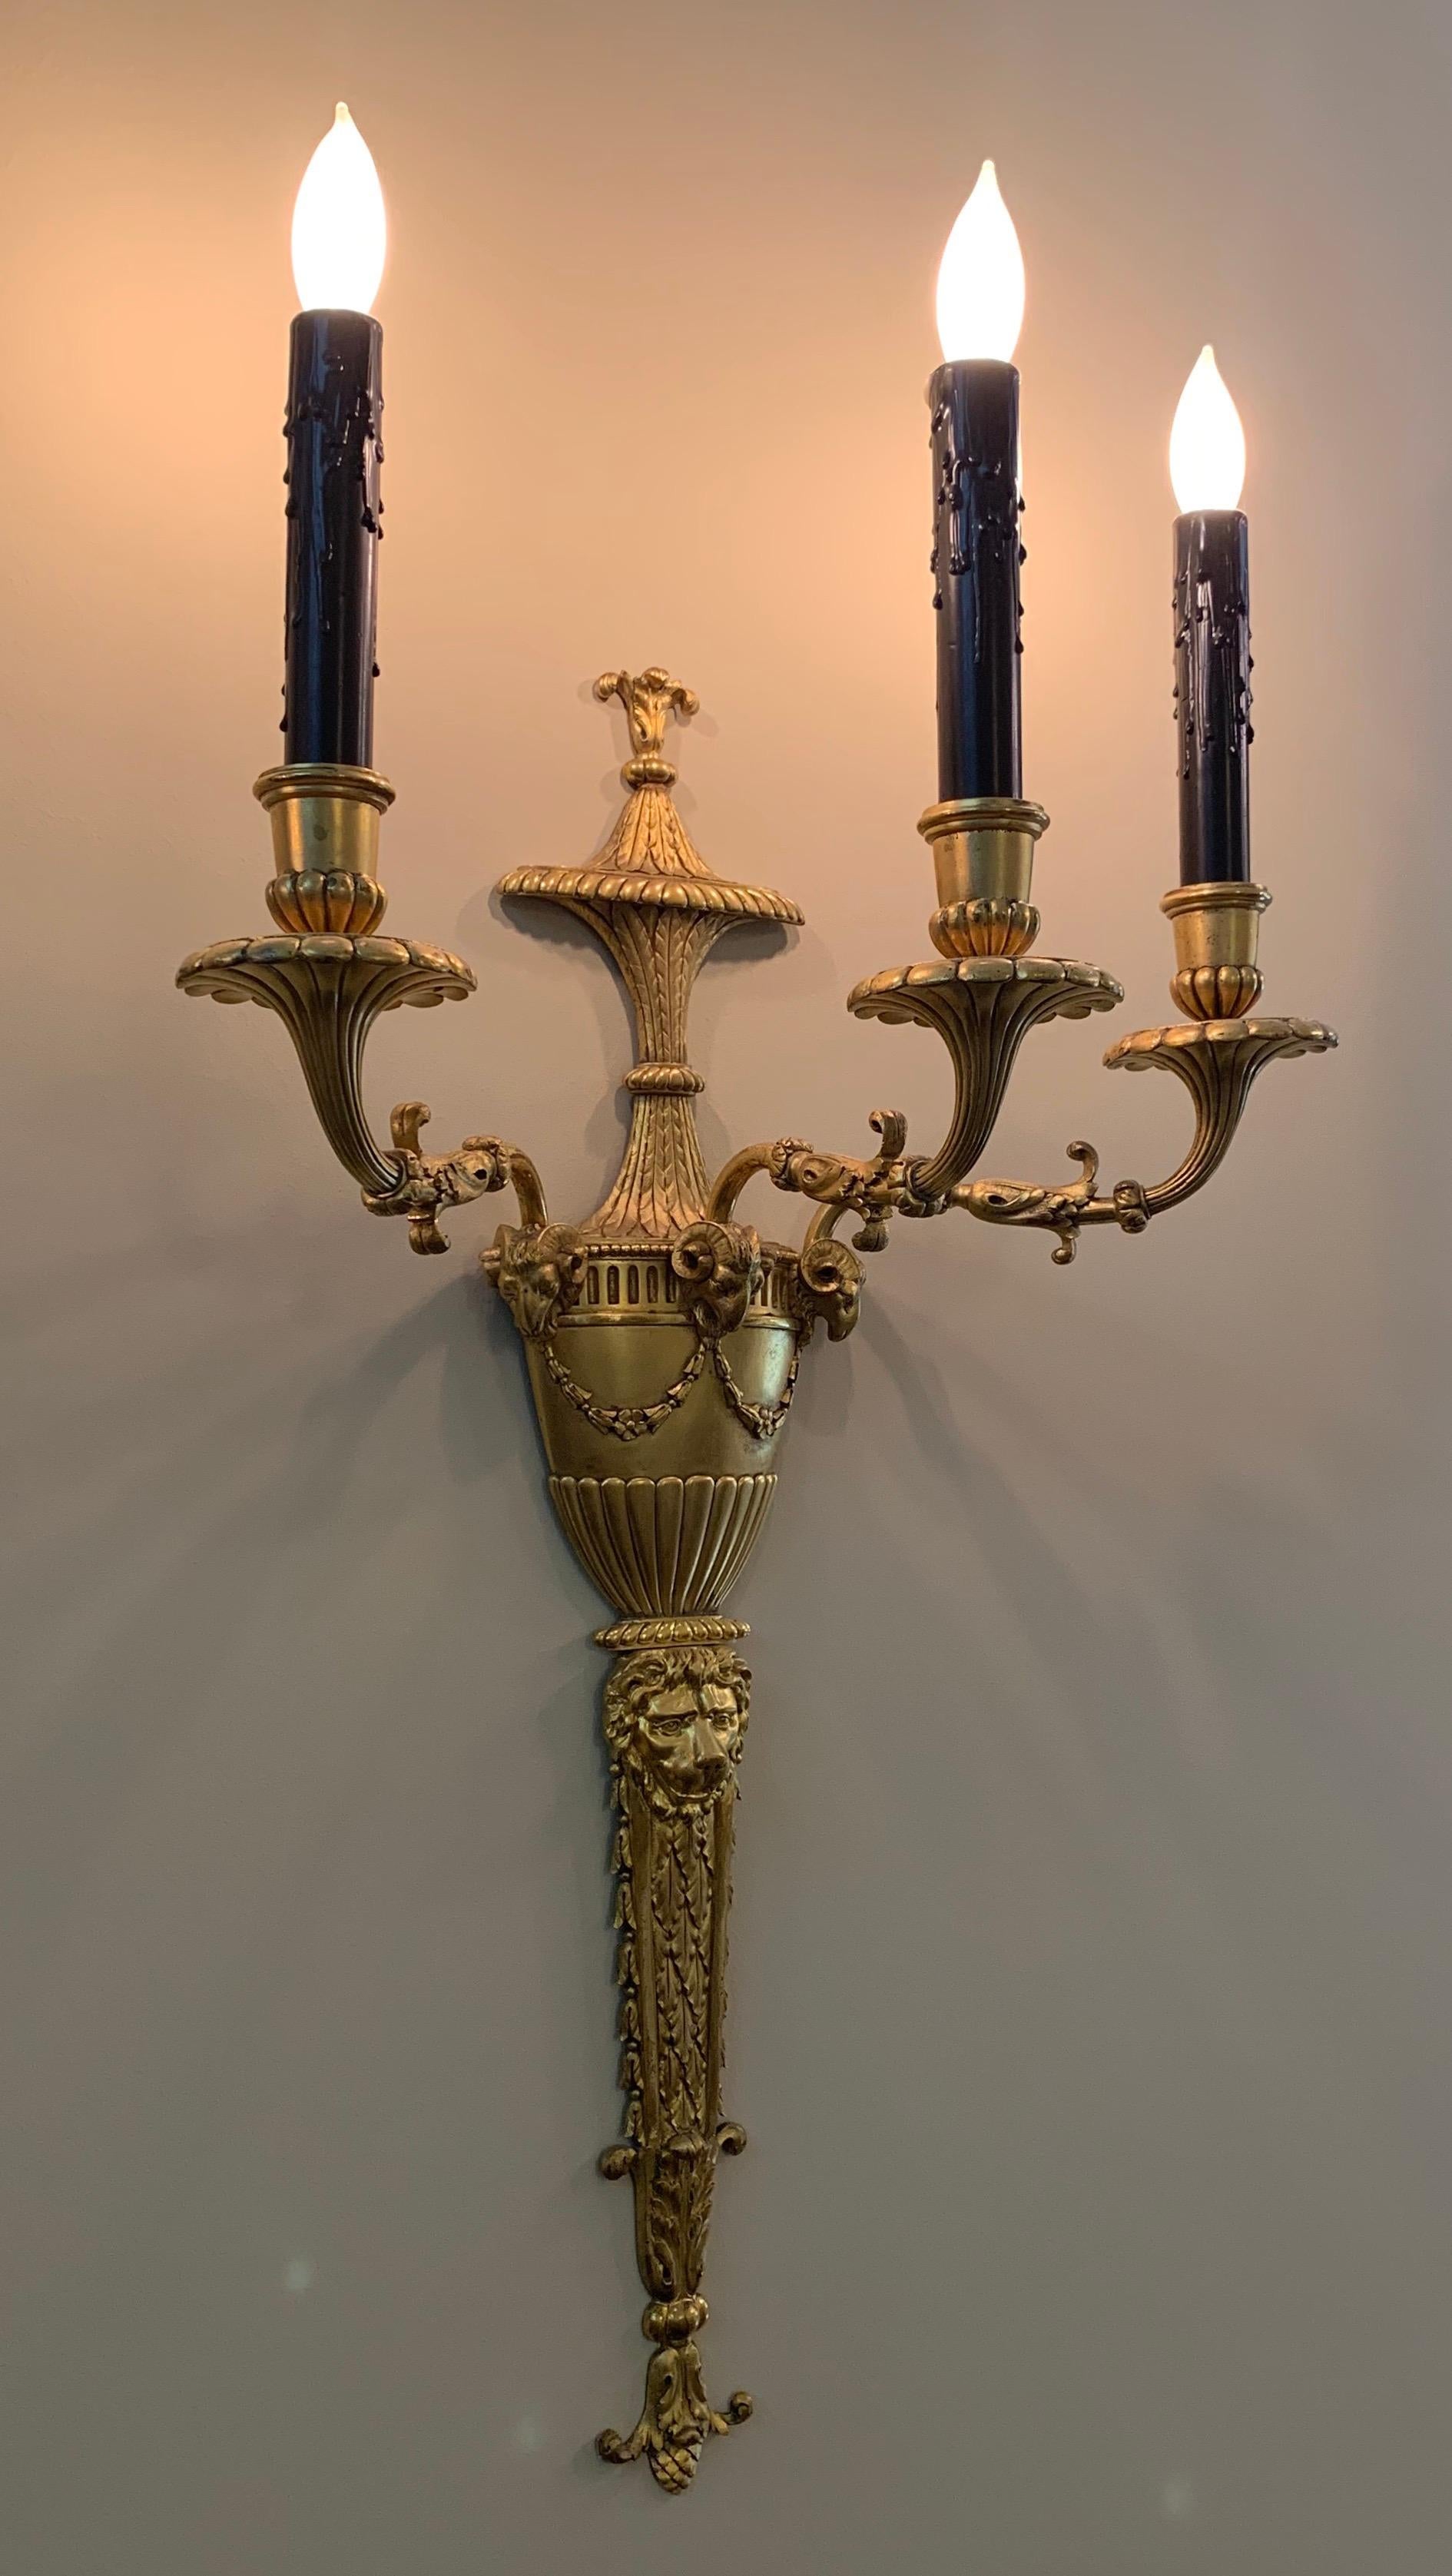 A wonderful pair of Caldwell style French doré bronze neoclassical / Empire 3 candelabra light lion, urn and ram's head form sconces.